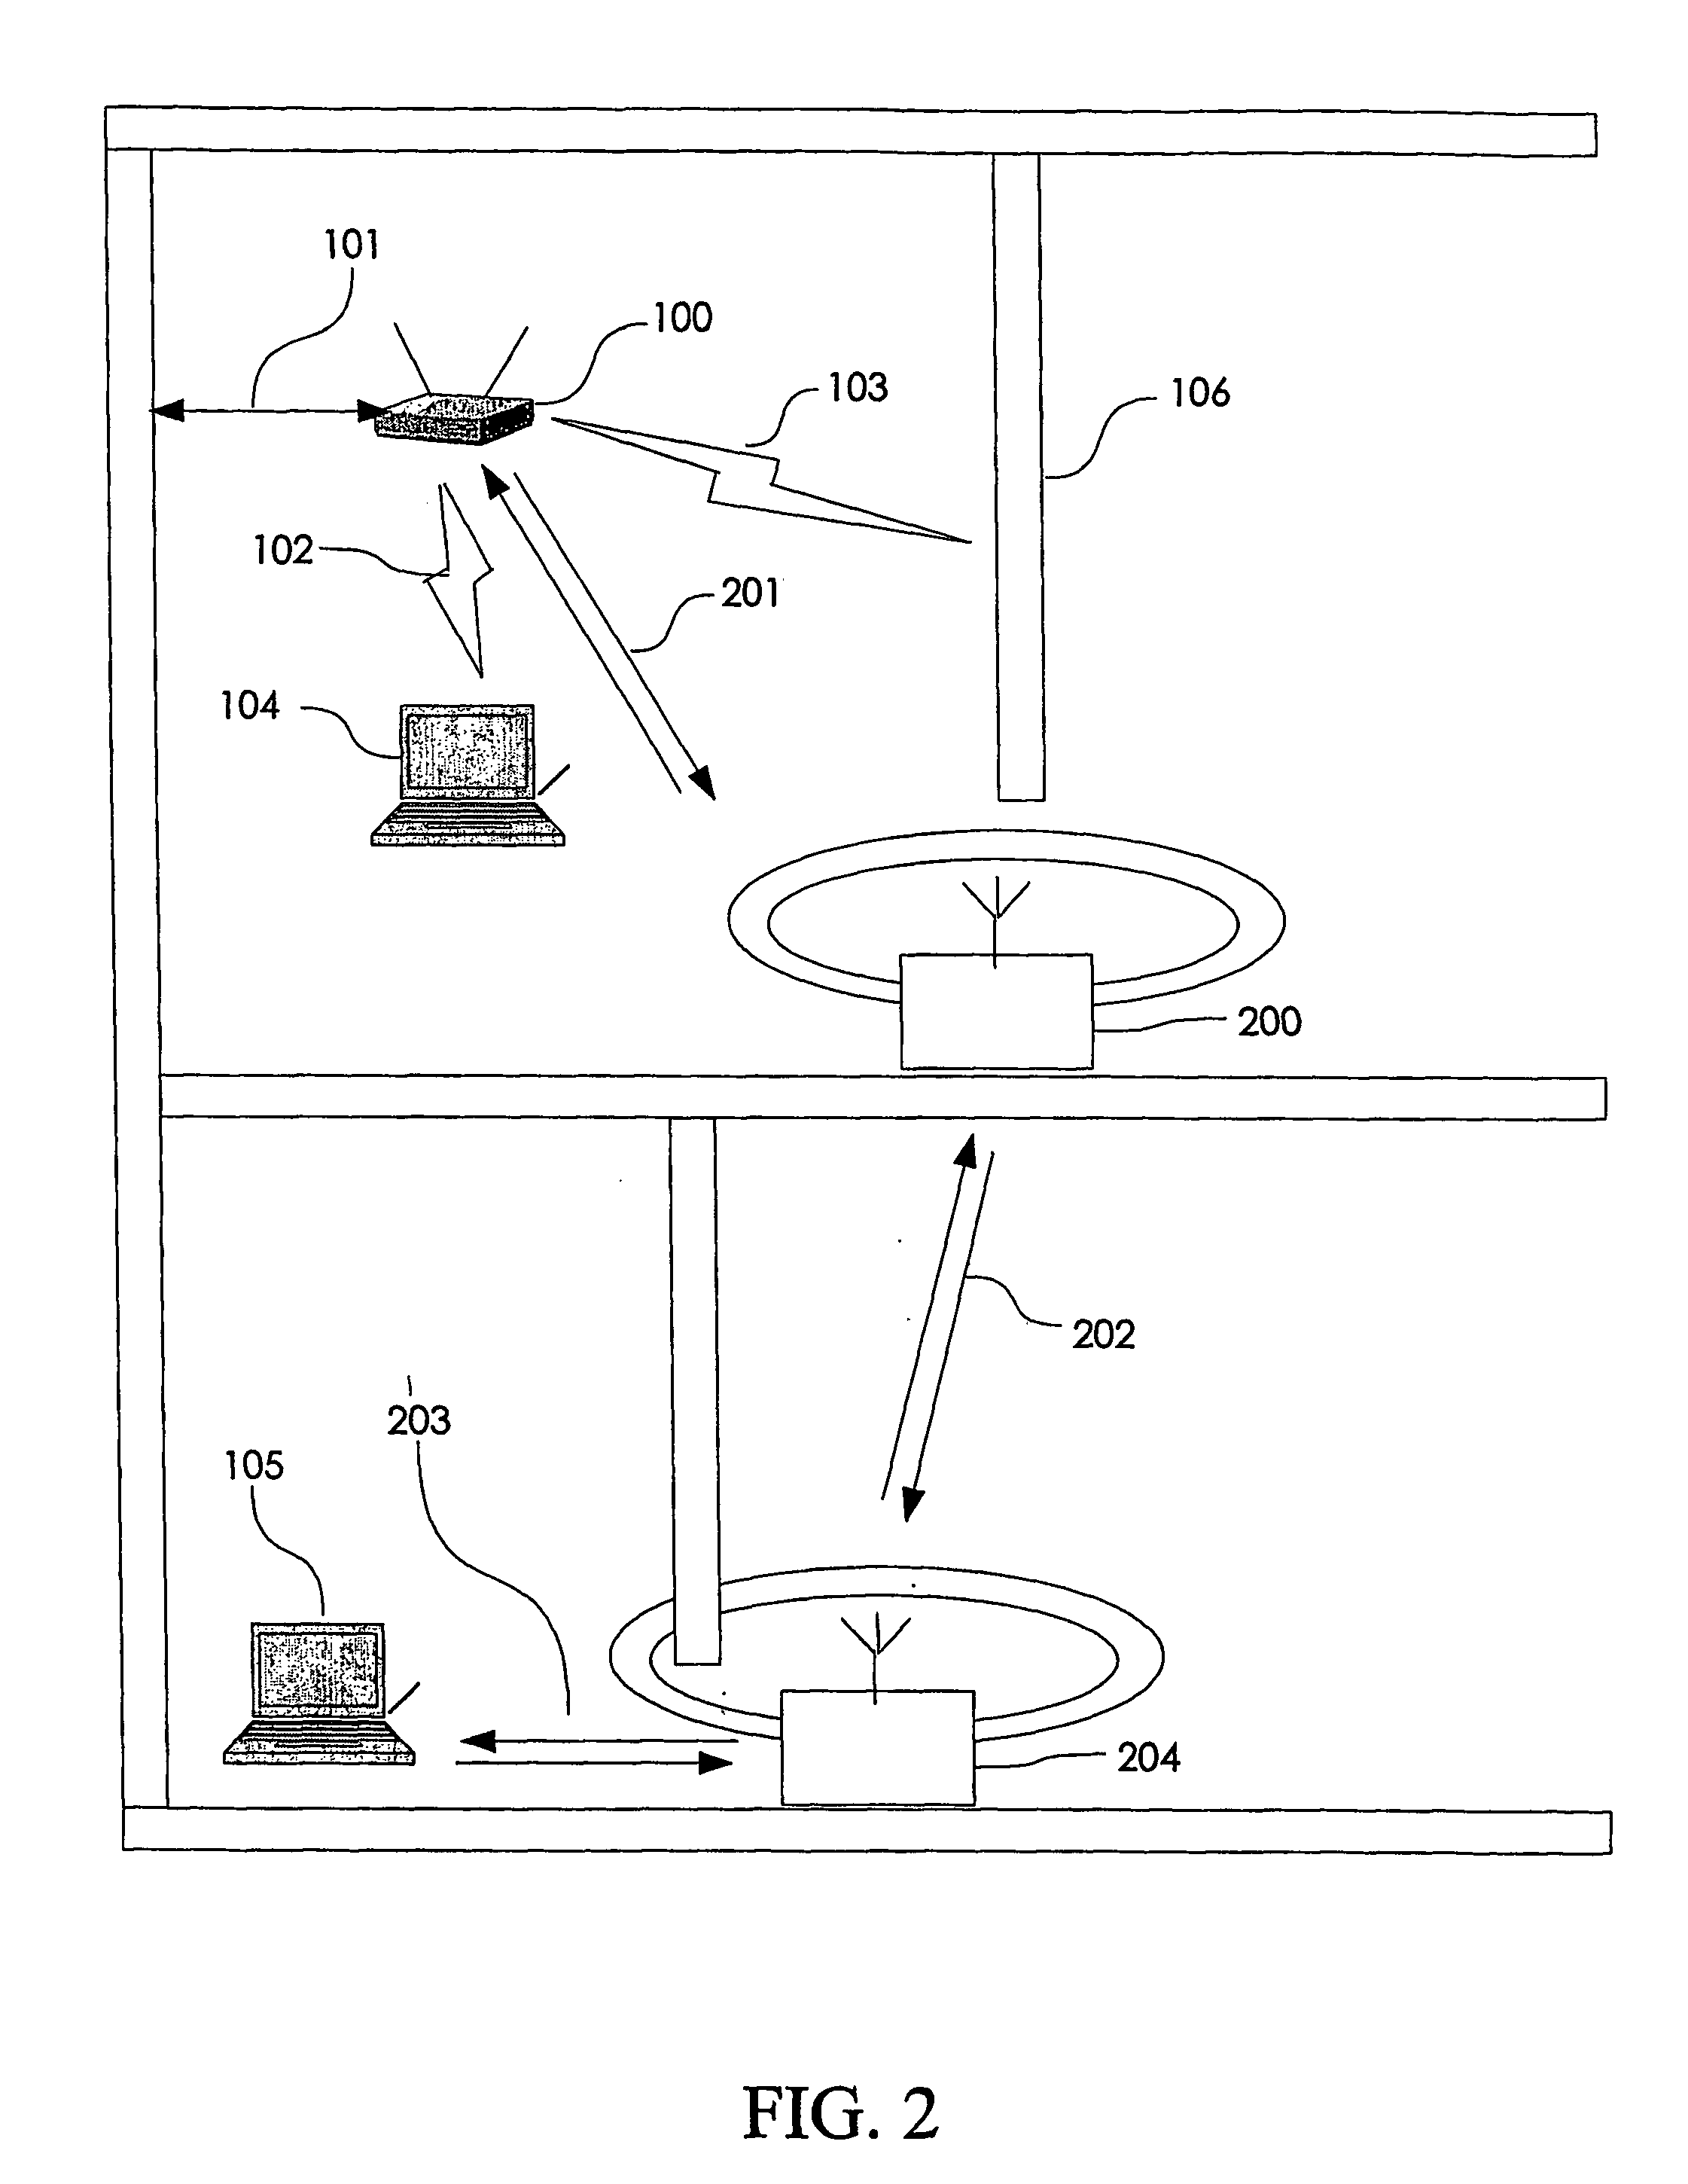 Wireless area network using frequency translation and retransmission based on modified protocol messages for enhancing network coverage